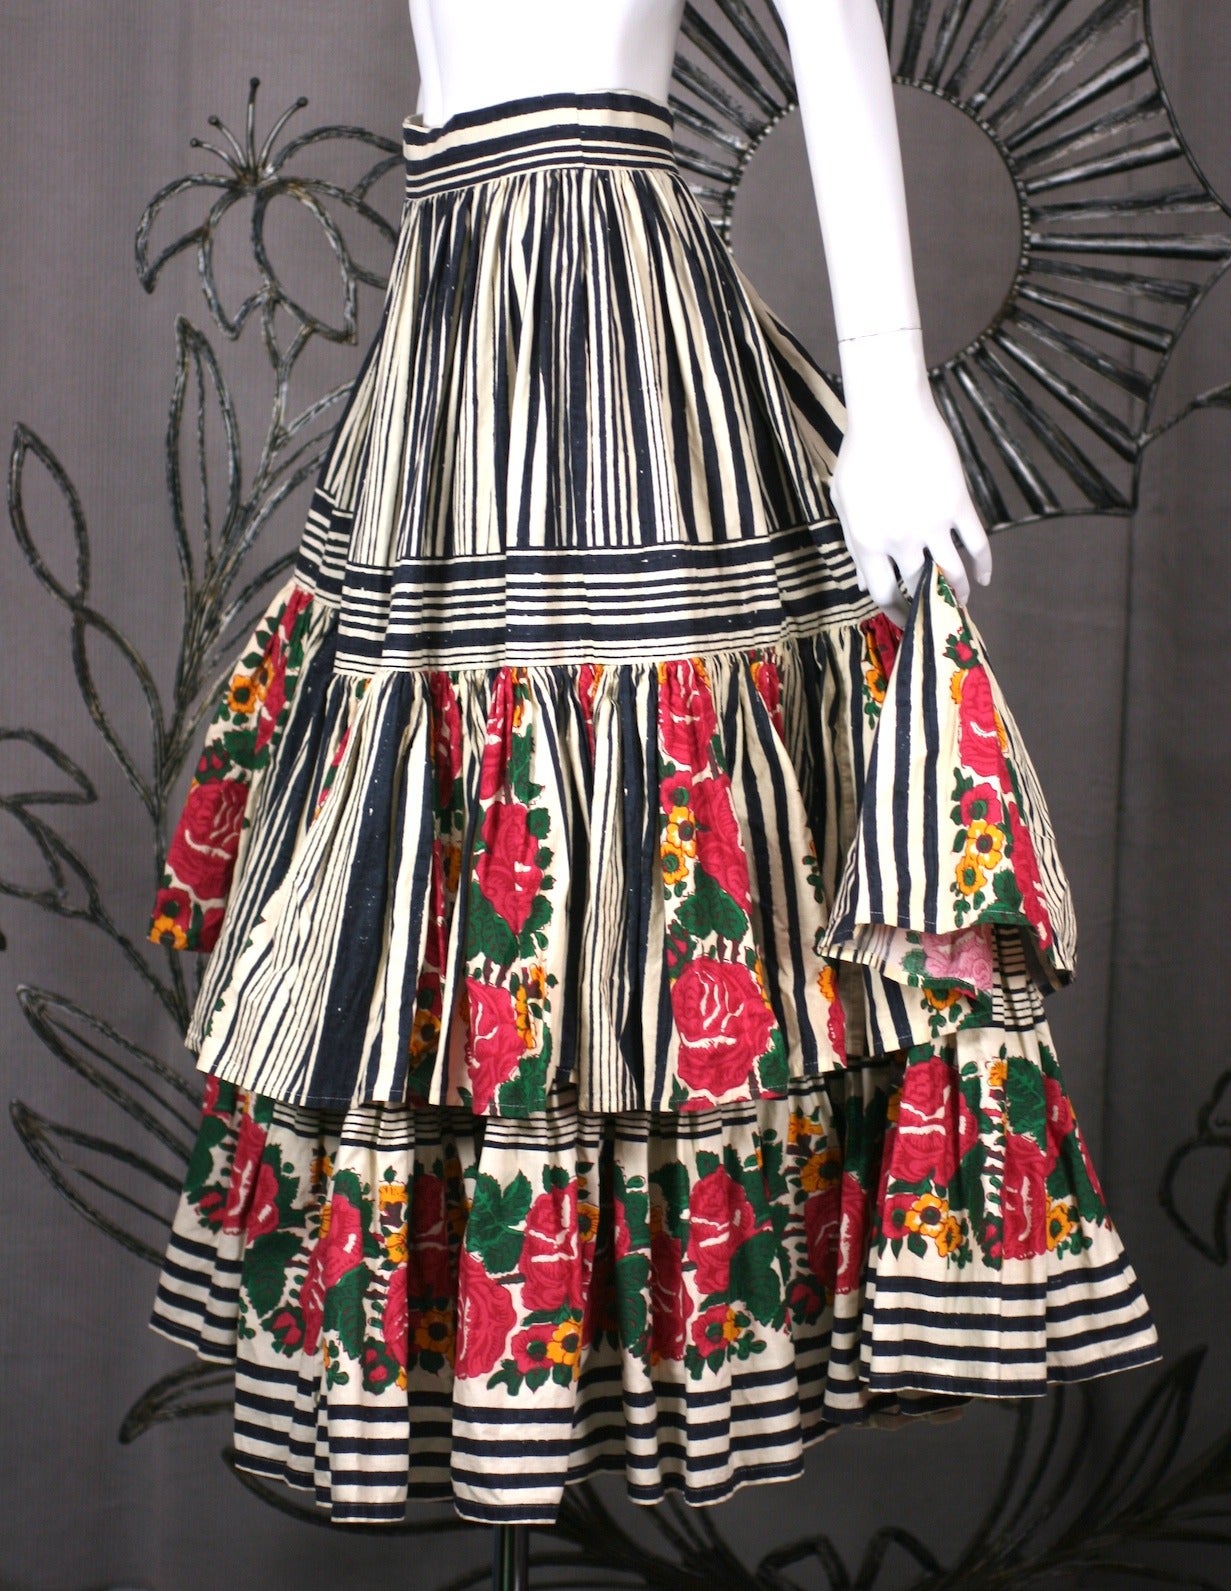 Super full, ruffled cotton skirt with antique Provencal wallpaper print. Skirt is gathered into waistband with 2 large ruffled tiers forming a dramatic Frida Kahlo like presence.
Excellent condition. 1980's France. 
Waist 25